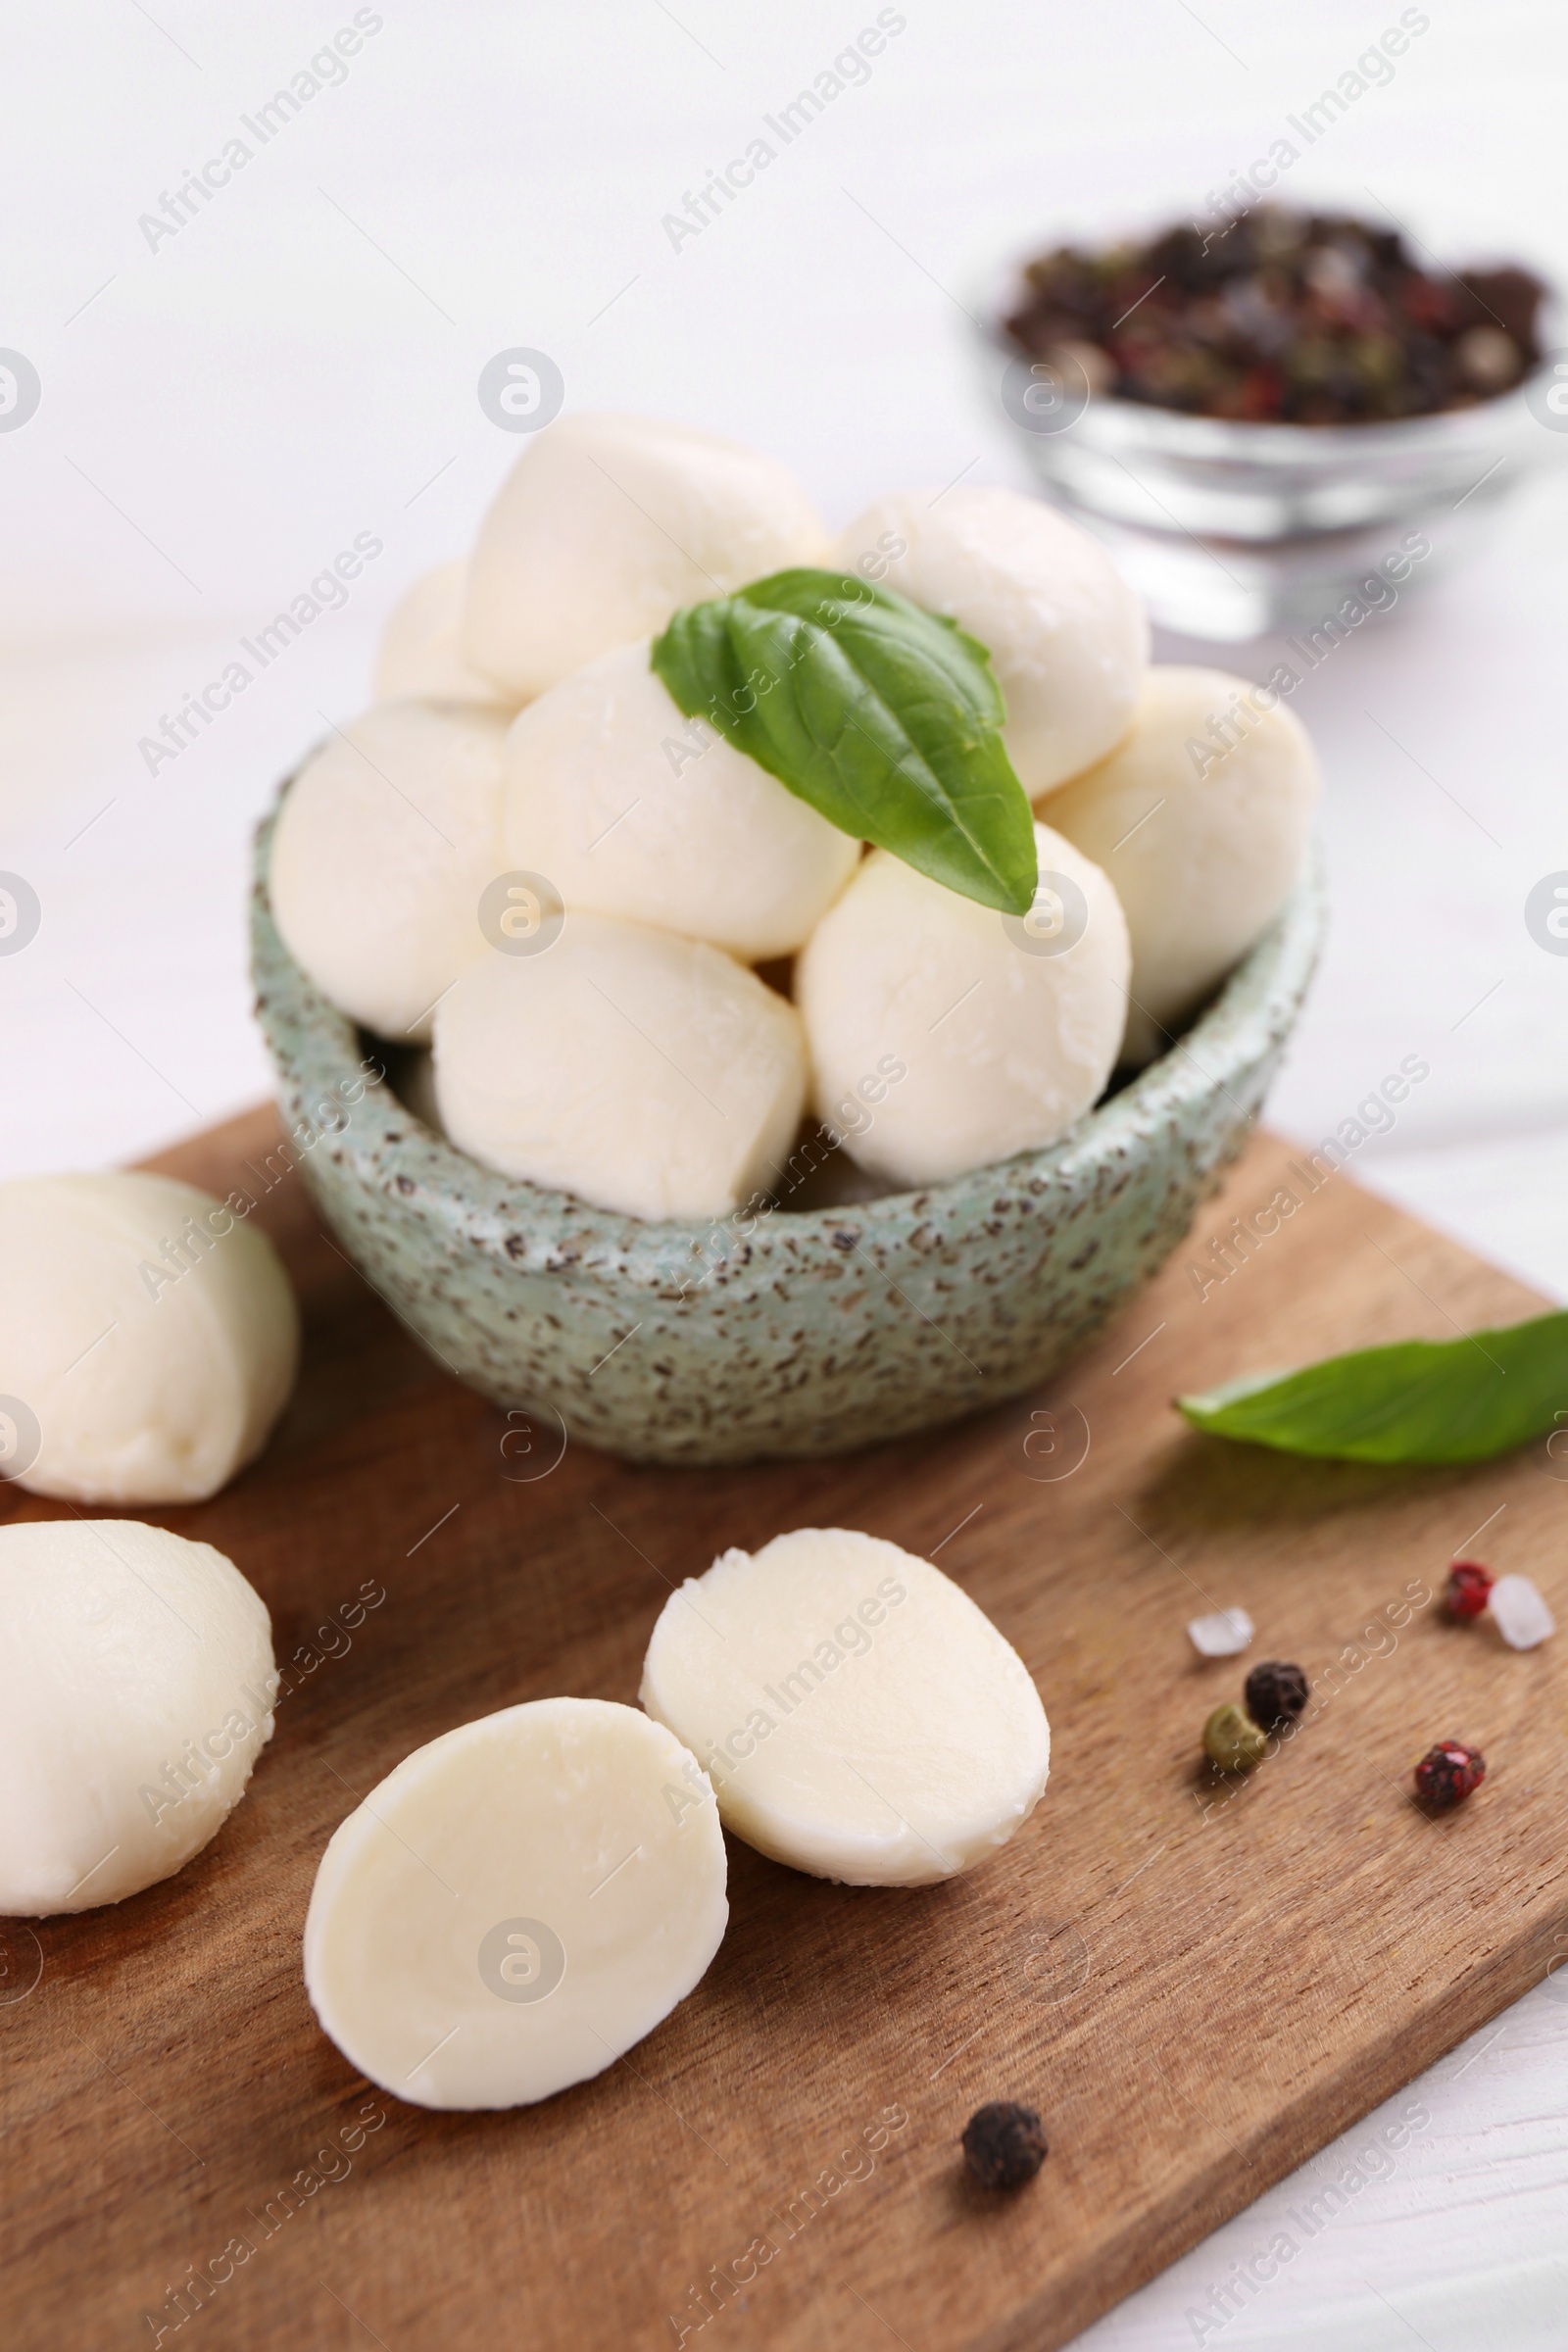 Photo of Tasty mozzarella balls, basil leaves and spices on white wooden table, closeup